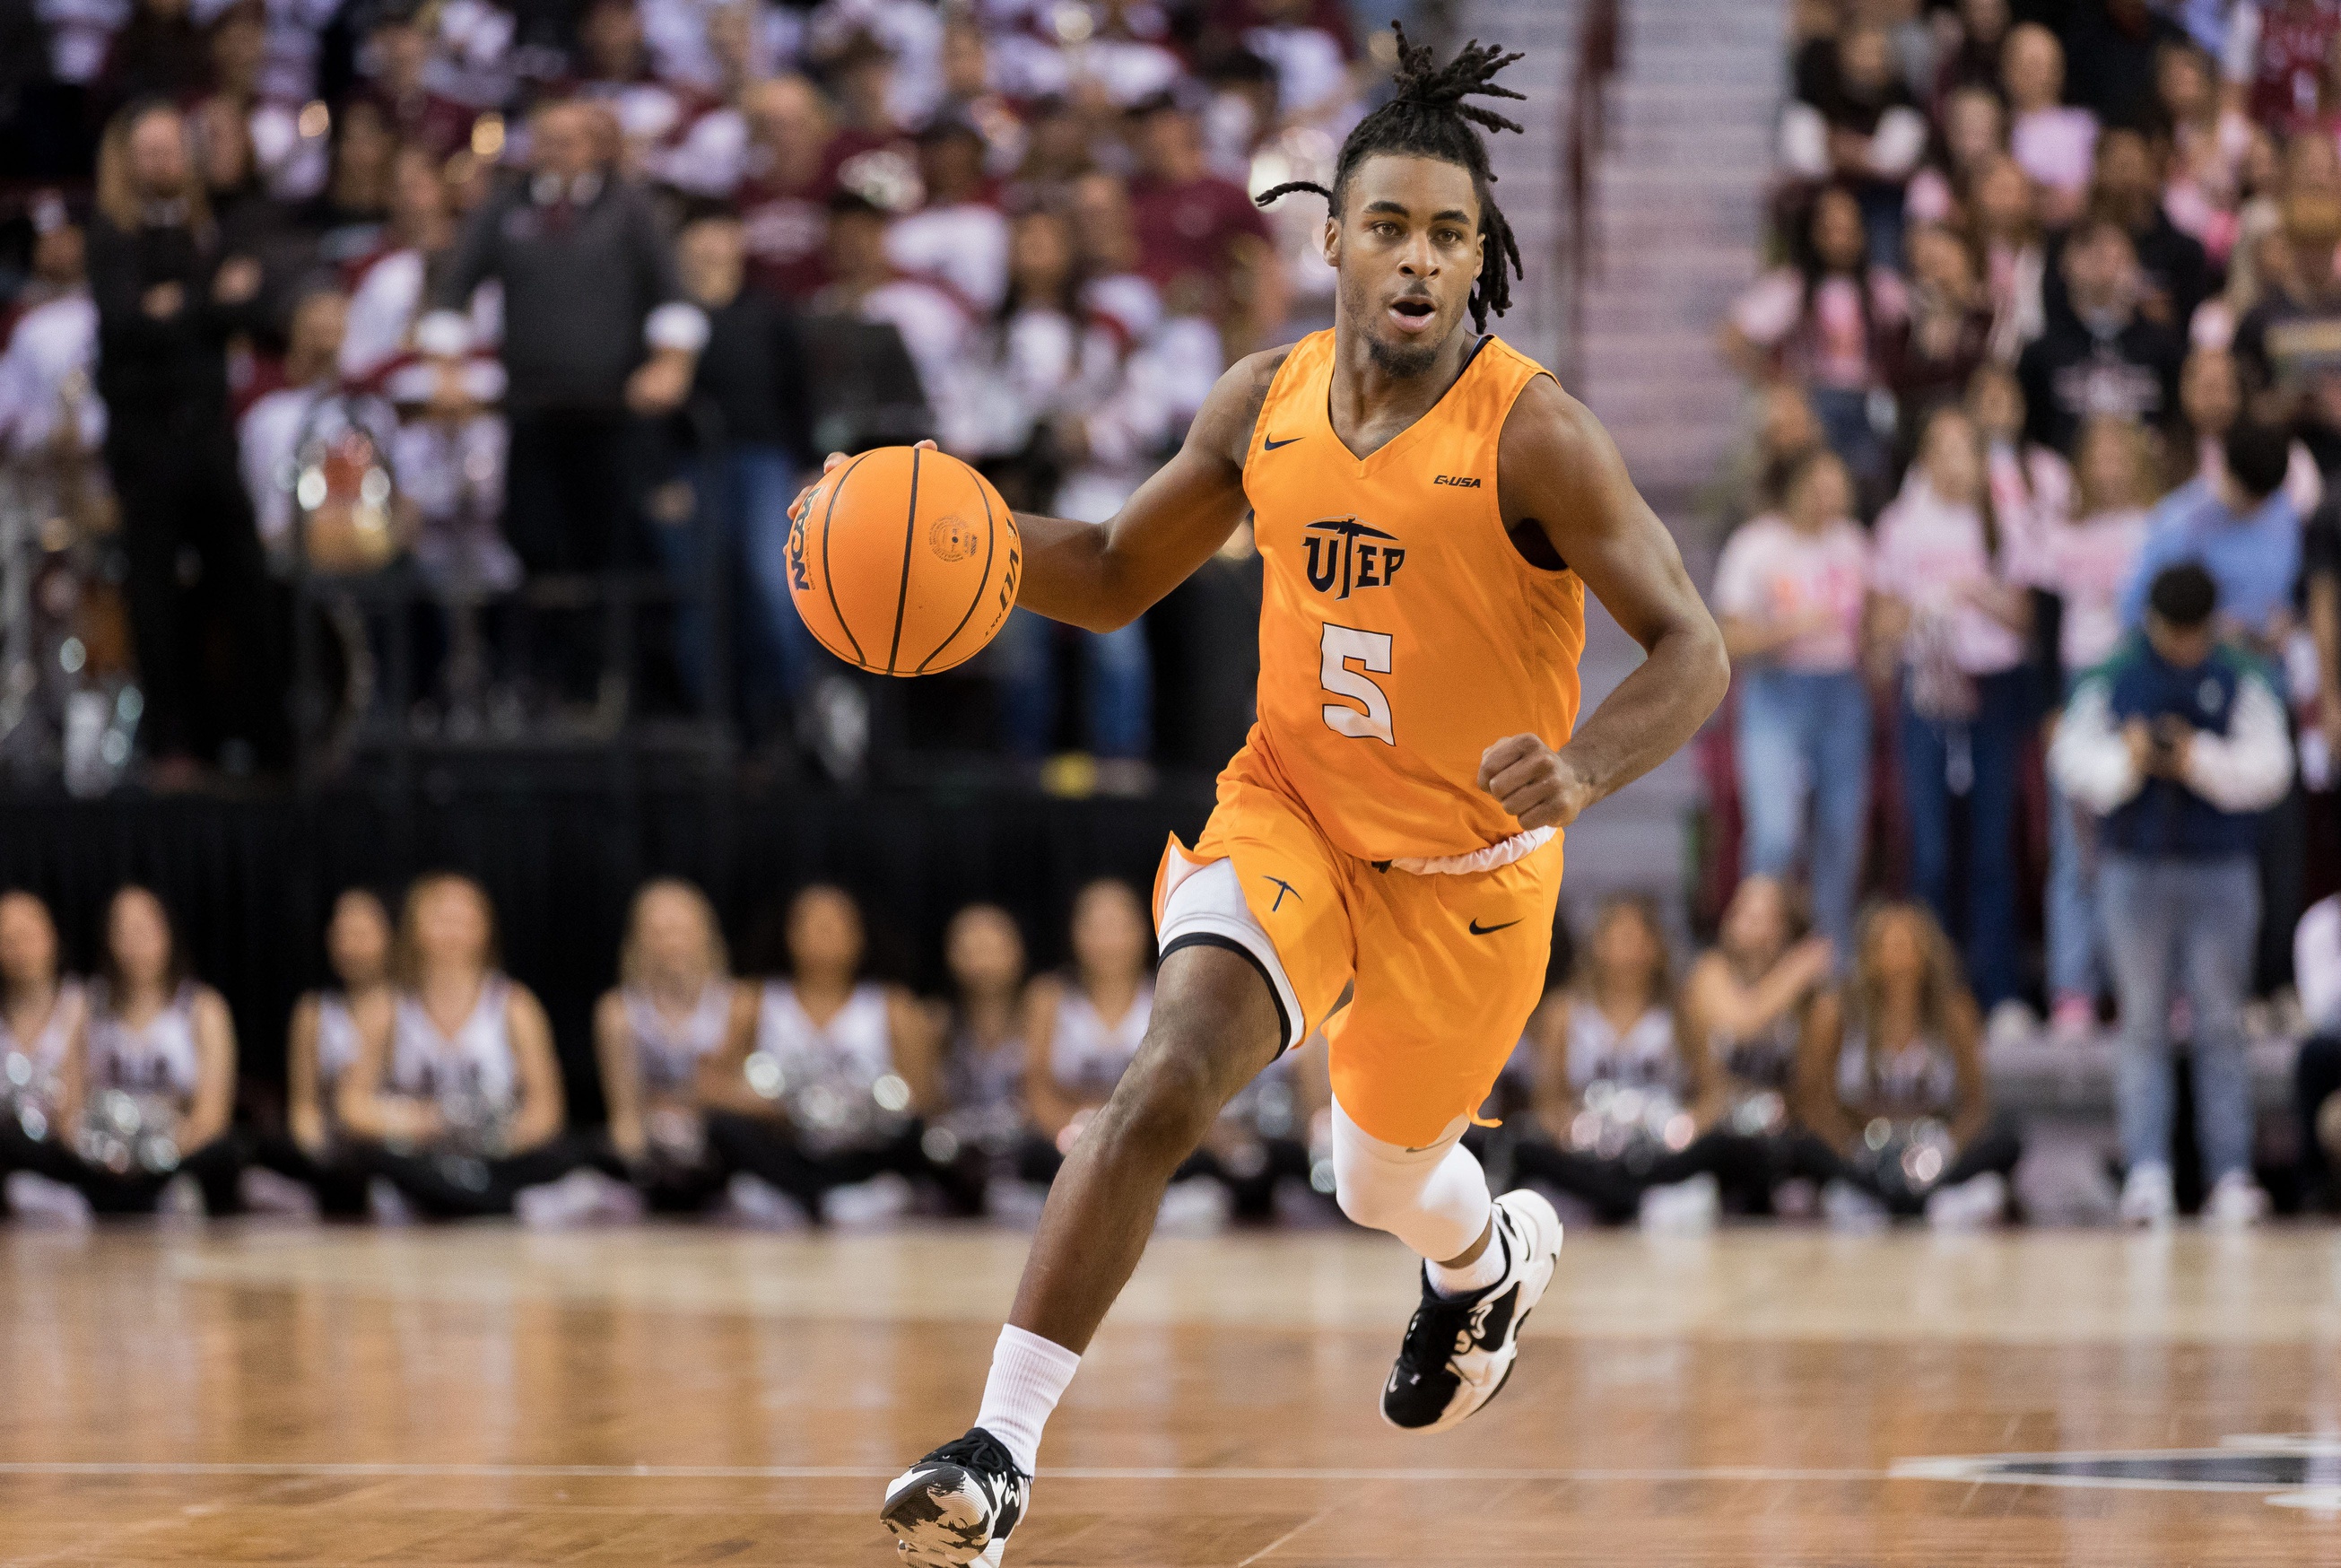 UAB Blazers vs UTEP Miners Prediction, 2/16/2023 College Basketball Picks, Best Bets & Odds